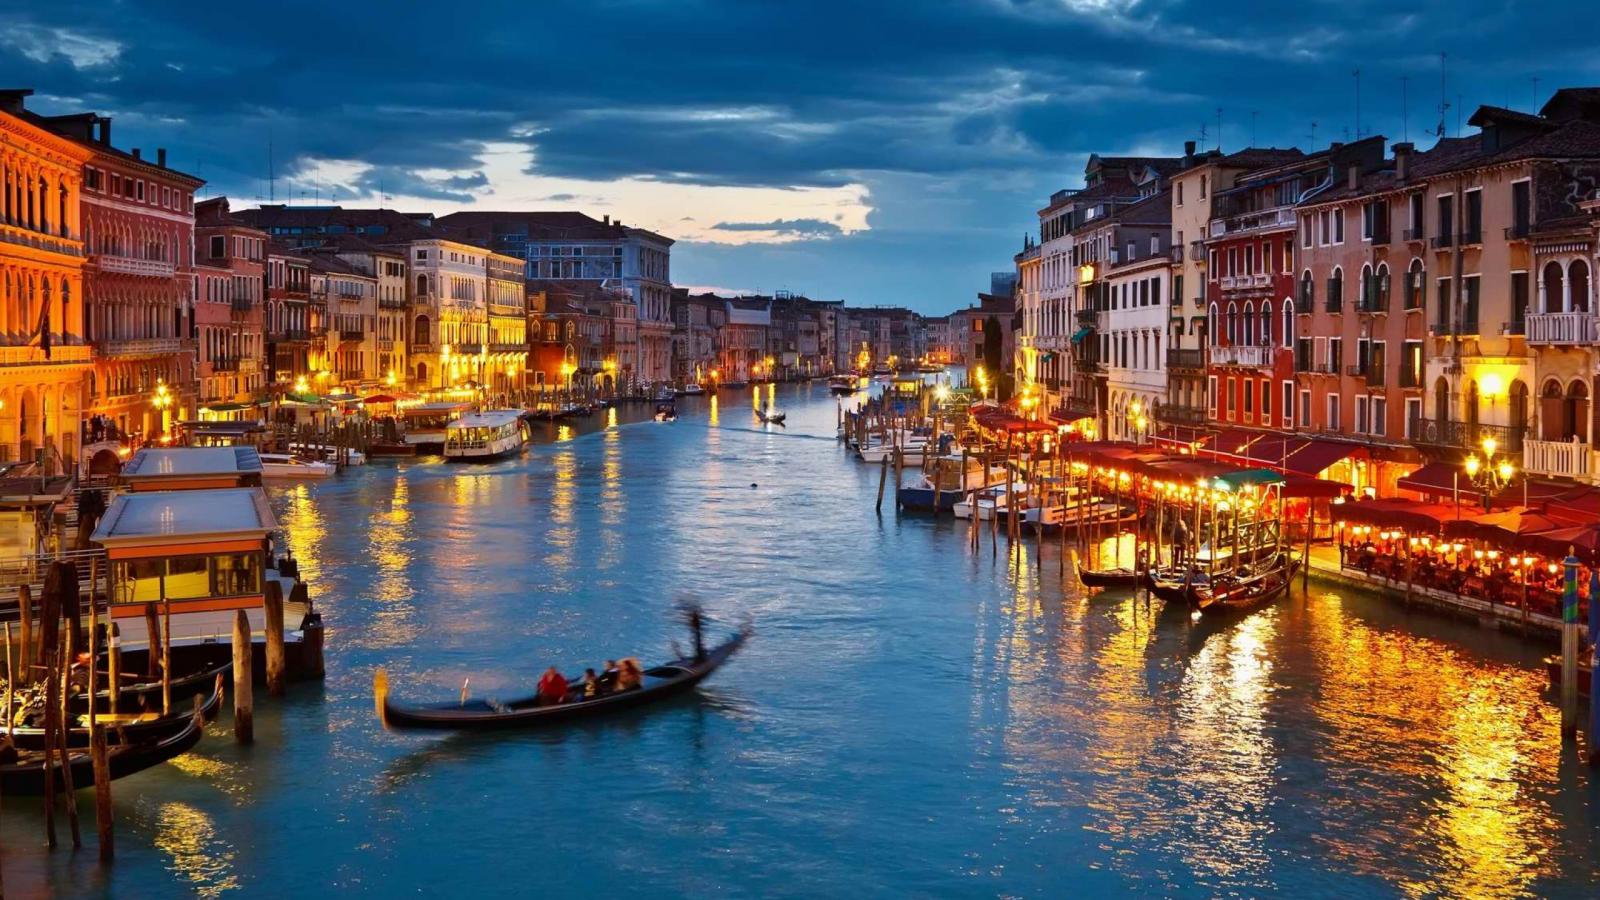 Desktop Background With Festival Lights In Venice Italy